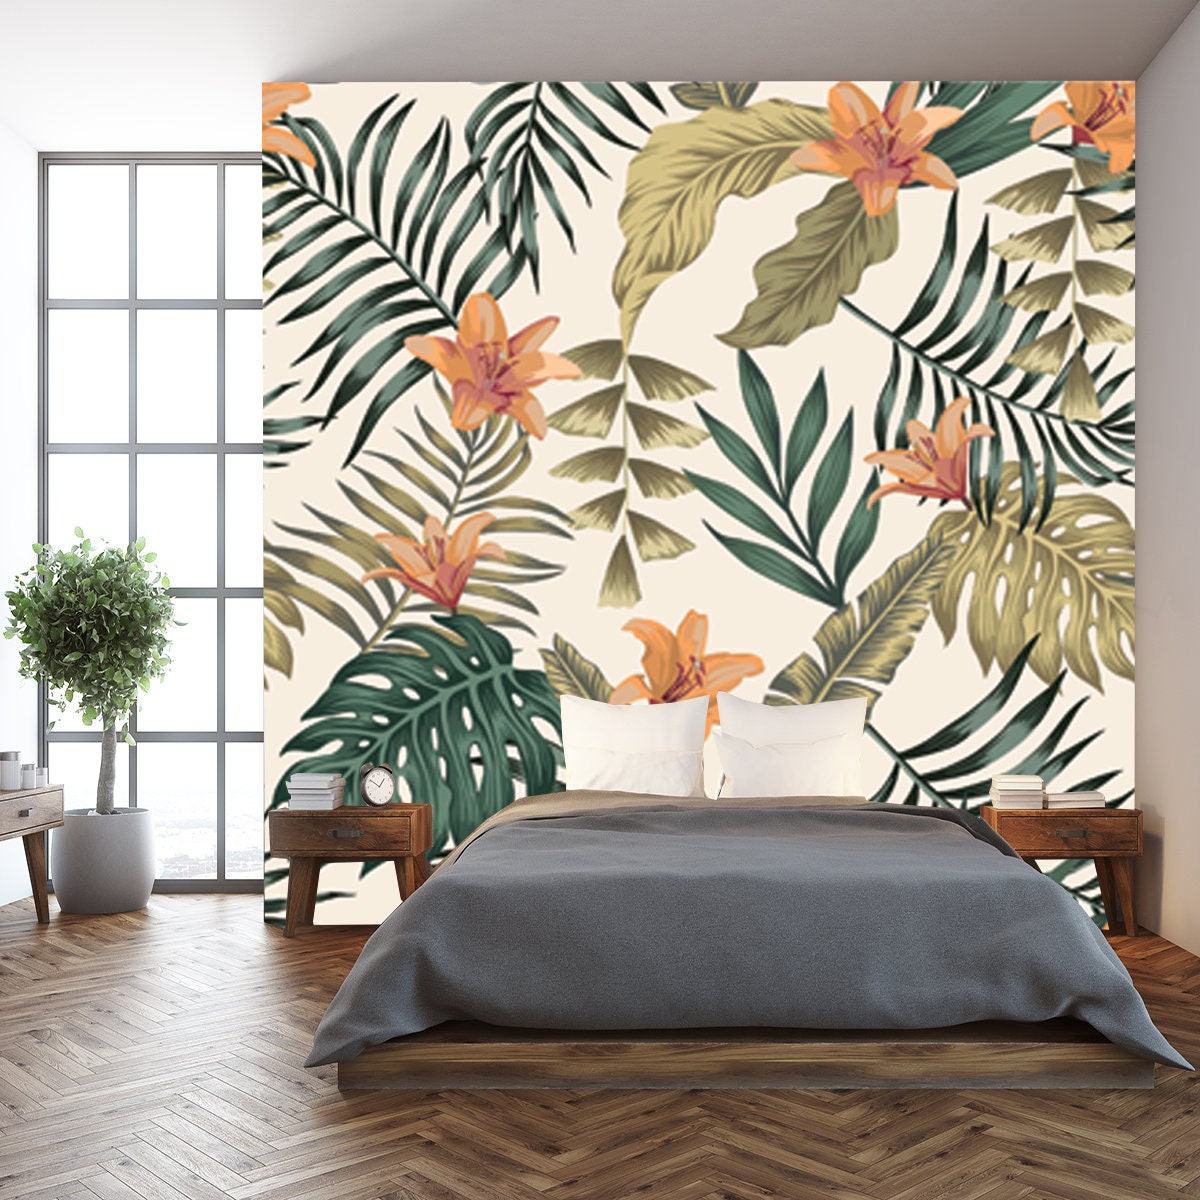 Tropical Green and Gold Palm, Banana Leaves and Orange Lily Flowers Abstract Colors Wallpaper Bedroom Mural